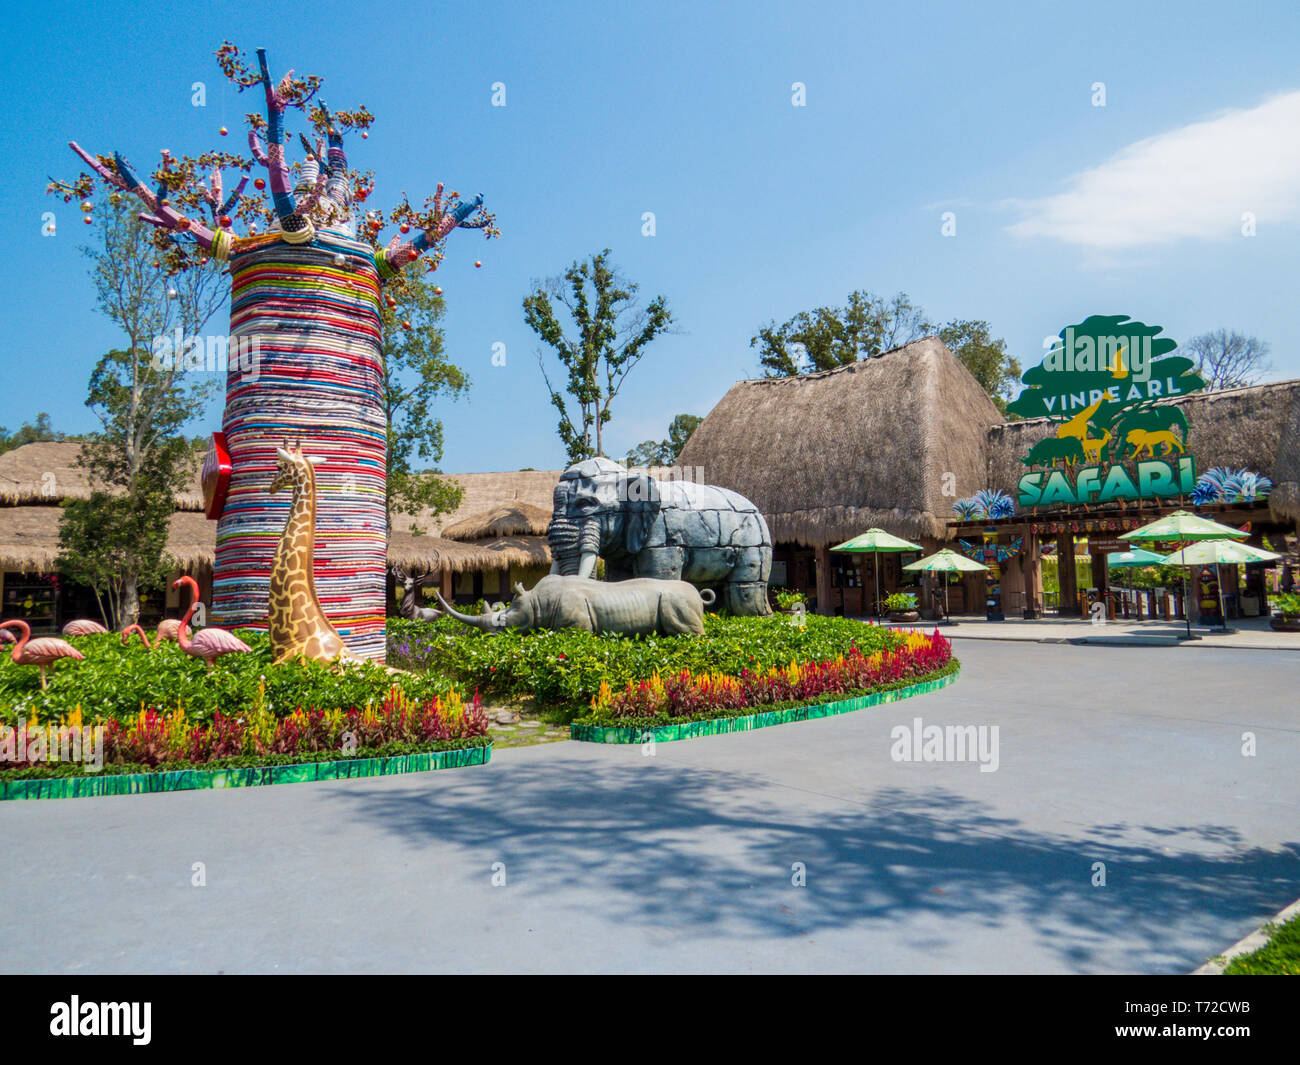 PHU QUOC, VIETNAM - FEBRUARY 12, 2018: View of the entrance to the Vinpearl Safari zoo park. Stock Photo